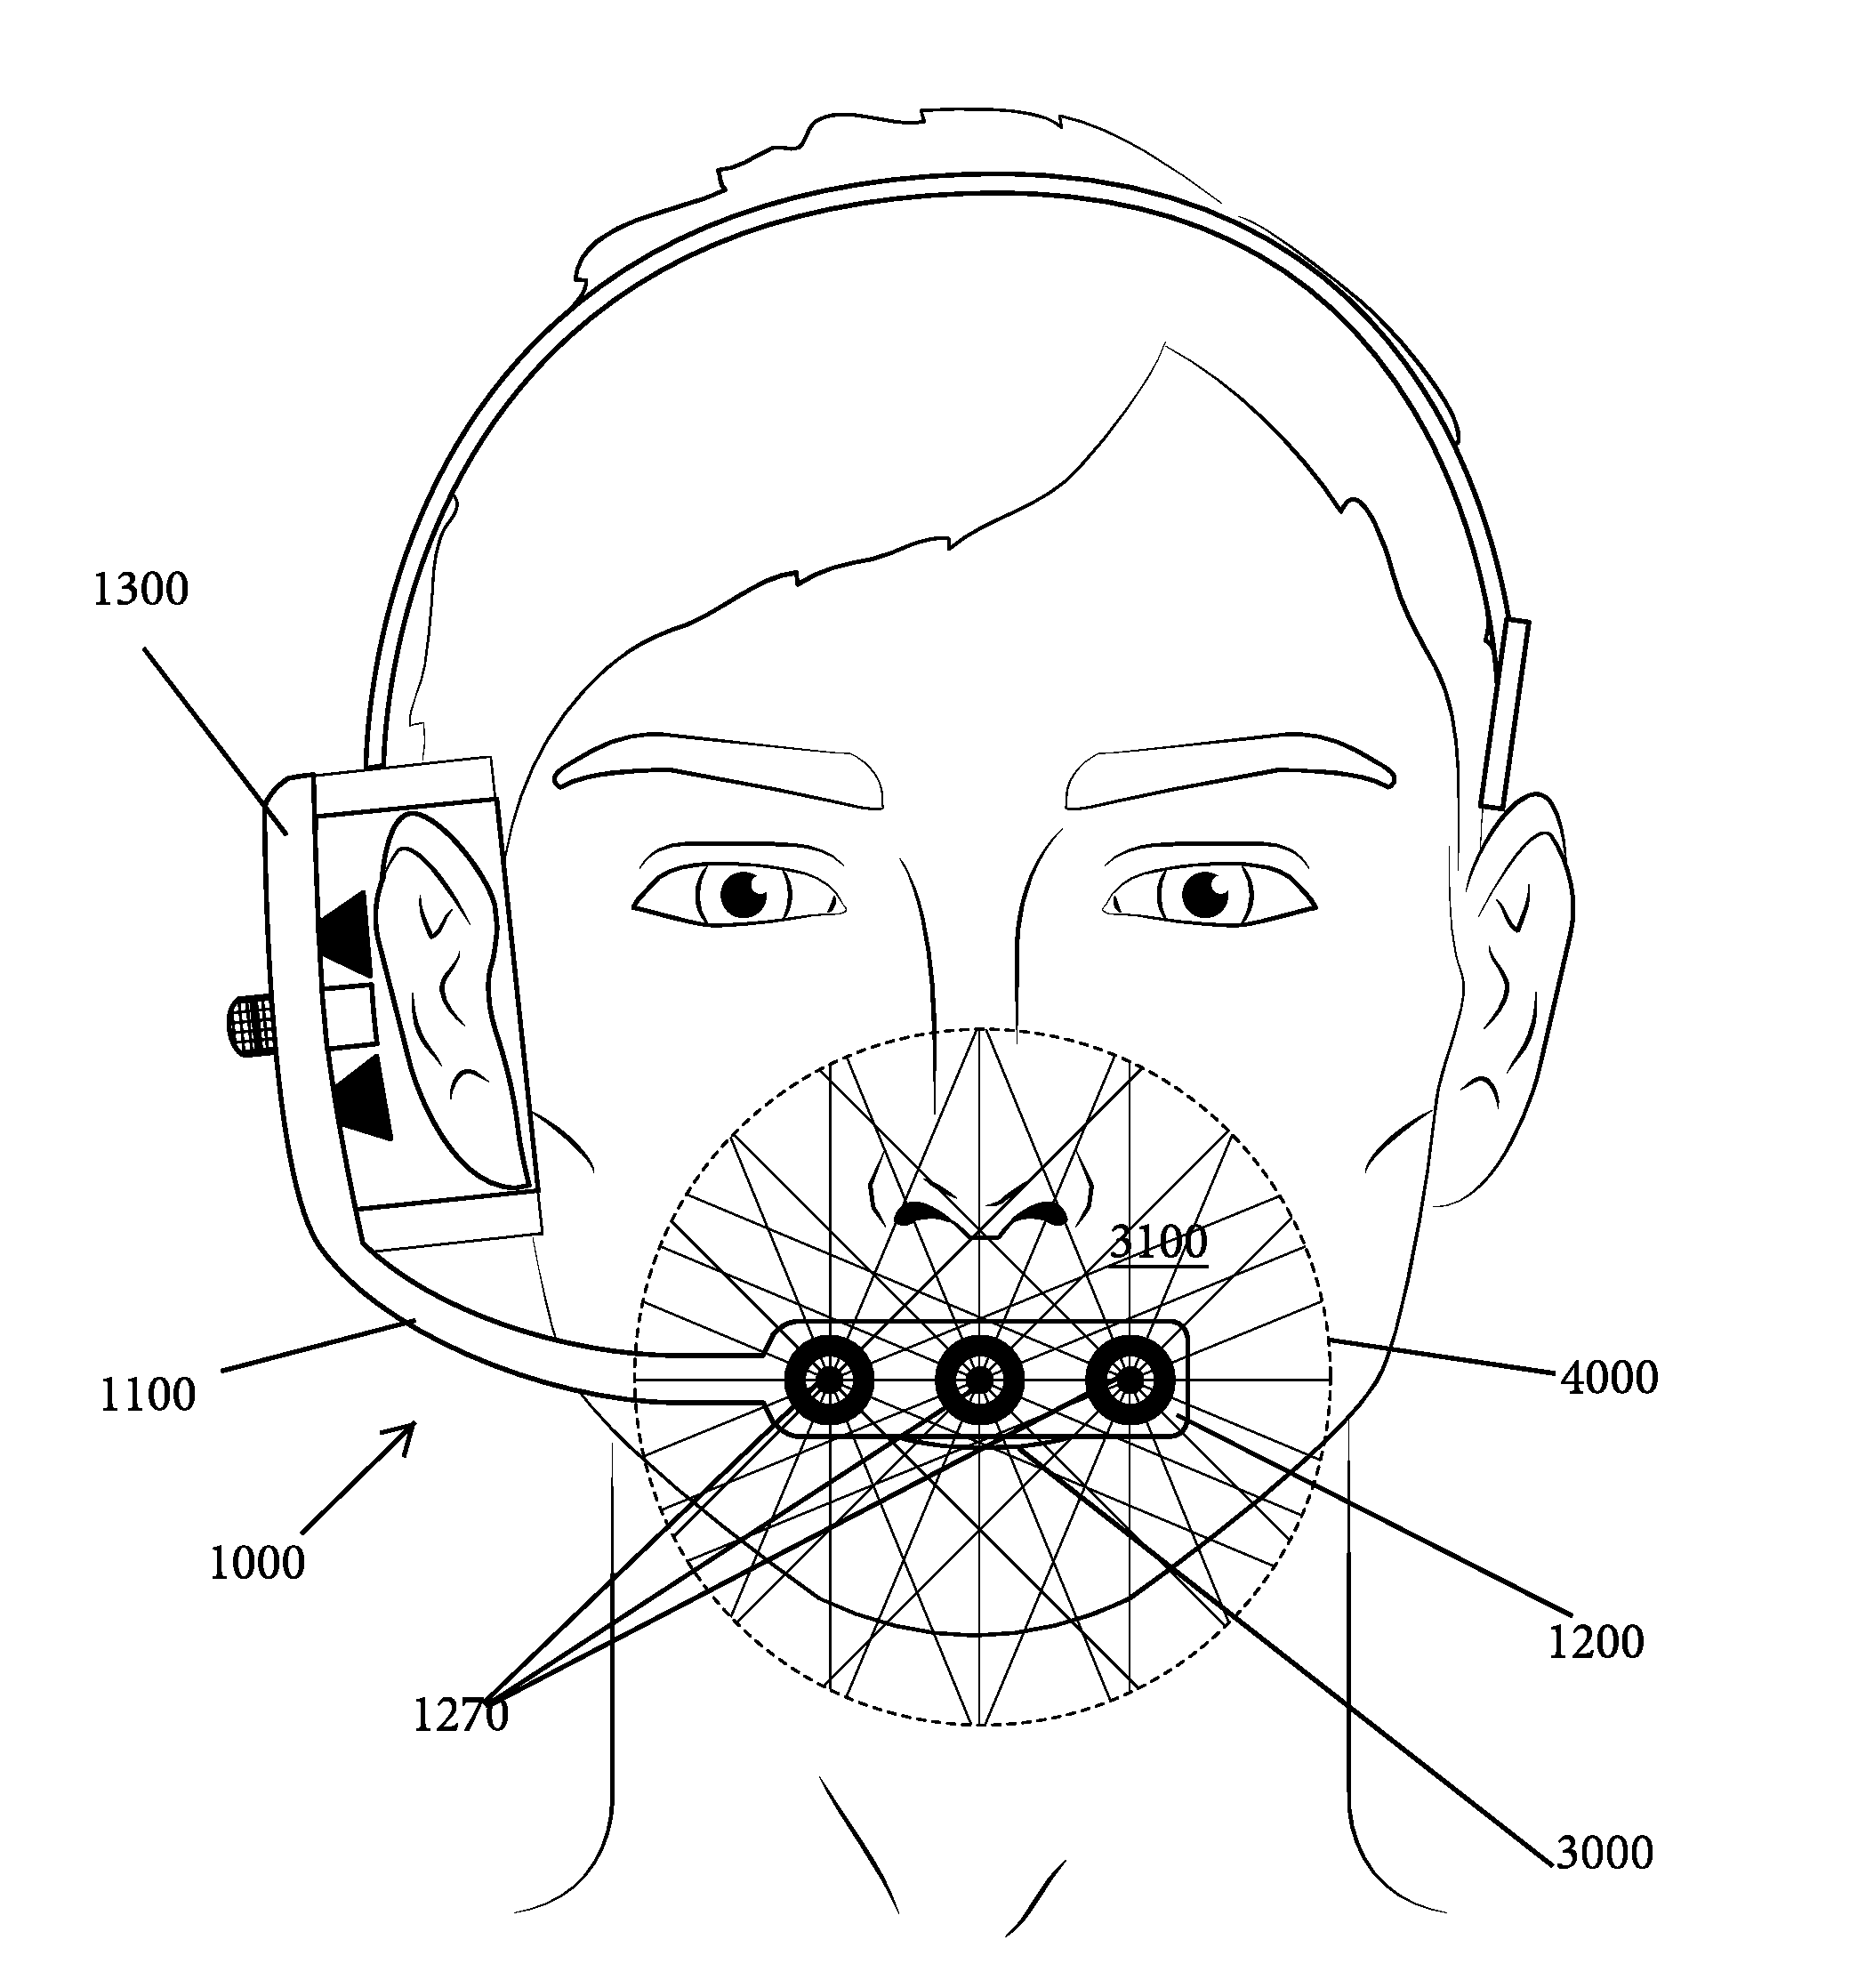 Ergonomic anechoic anti-noise canceling chamber for use with a communication device and related methods